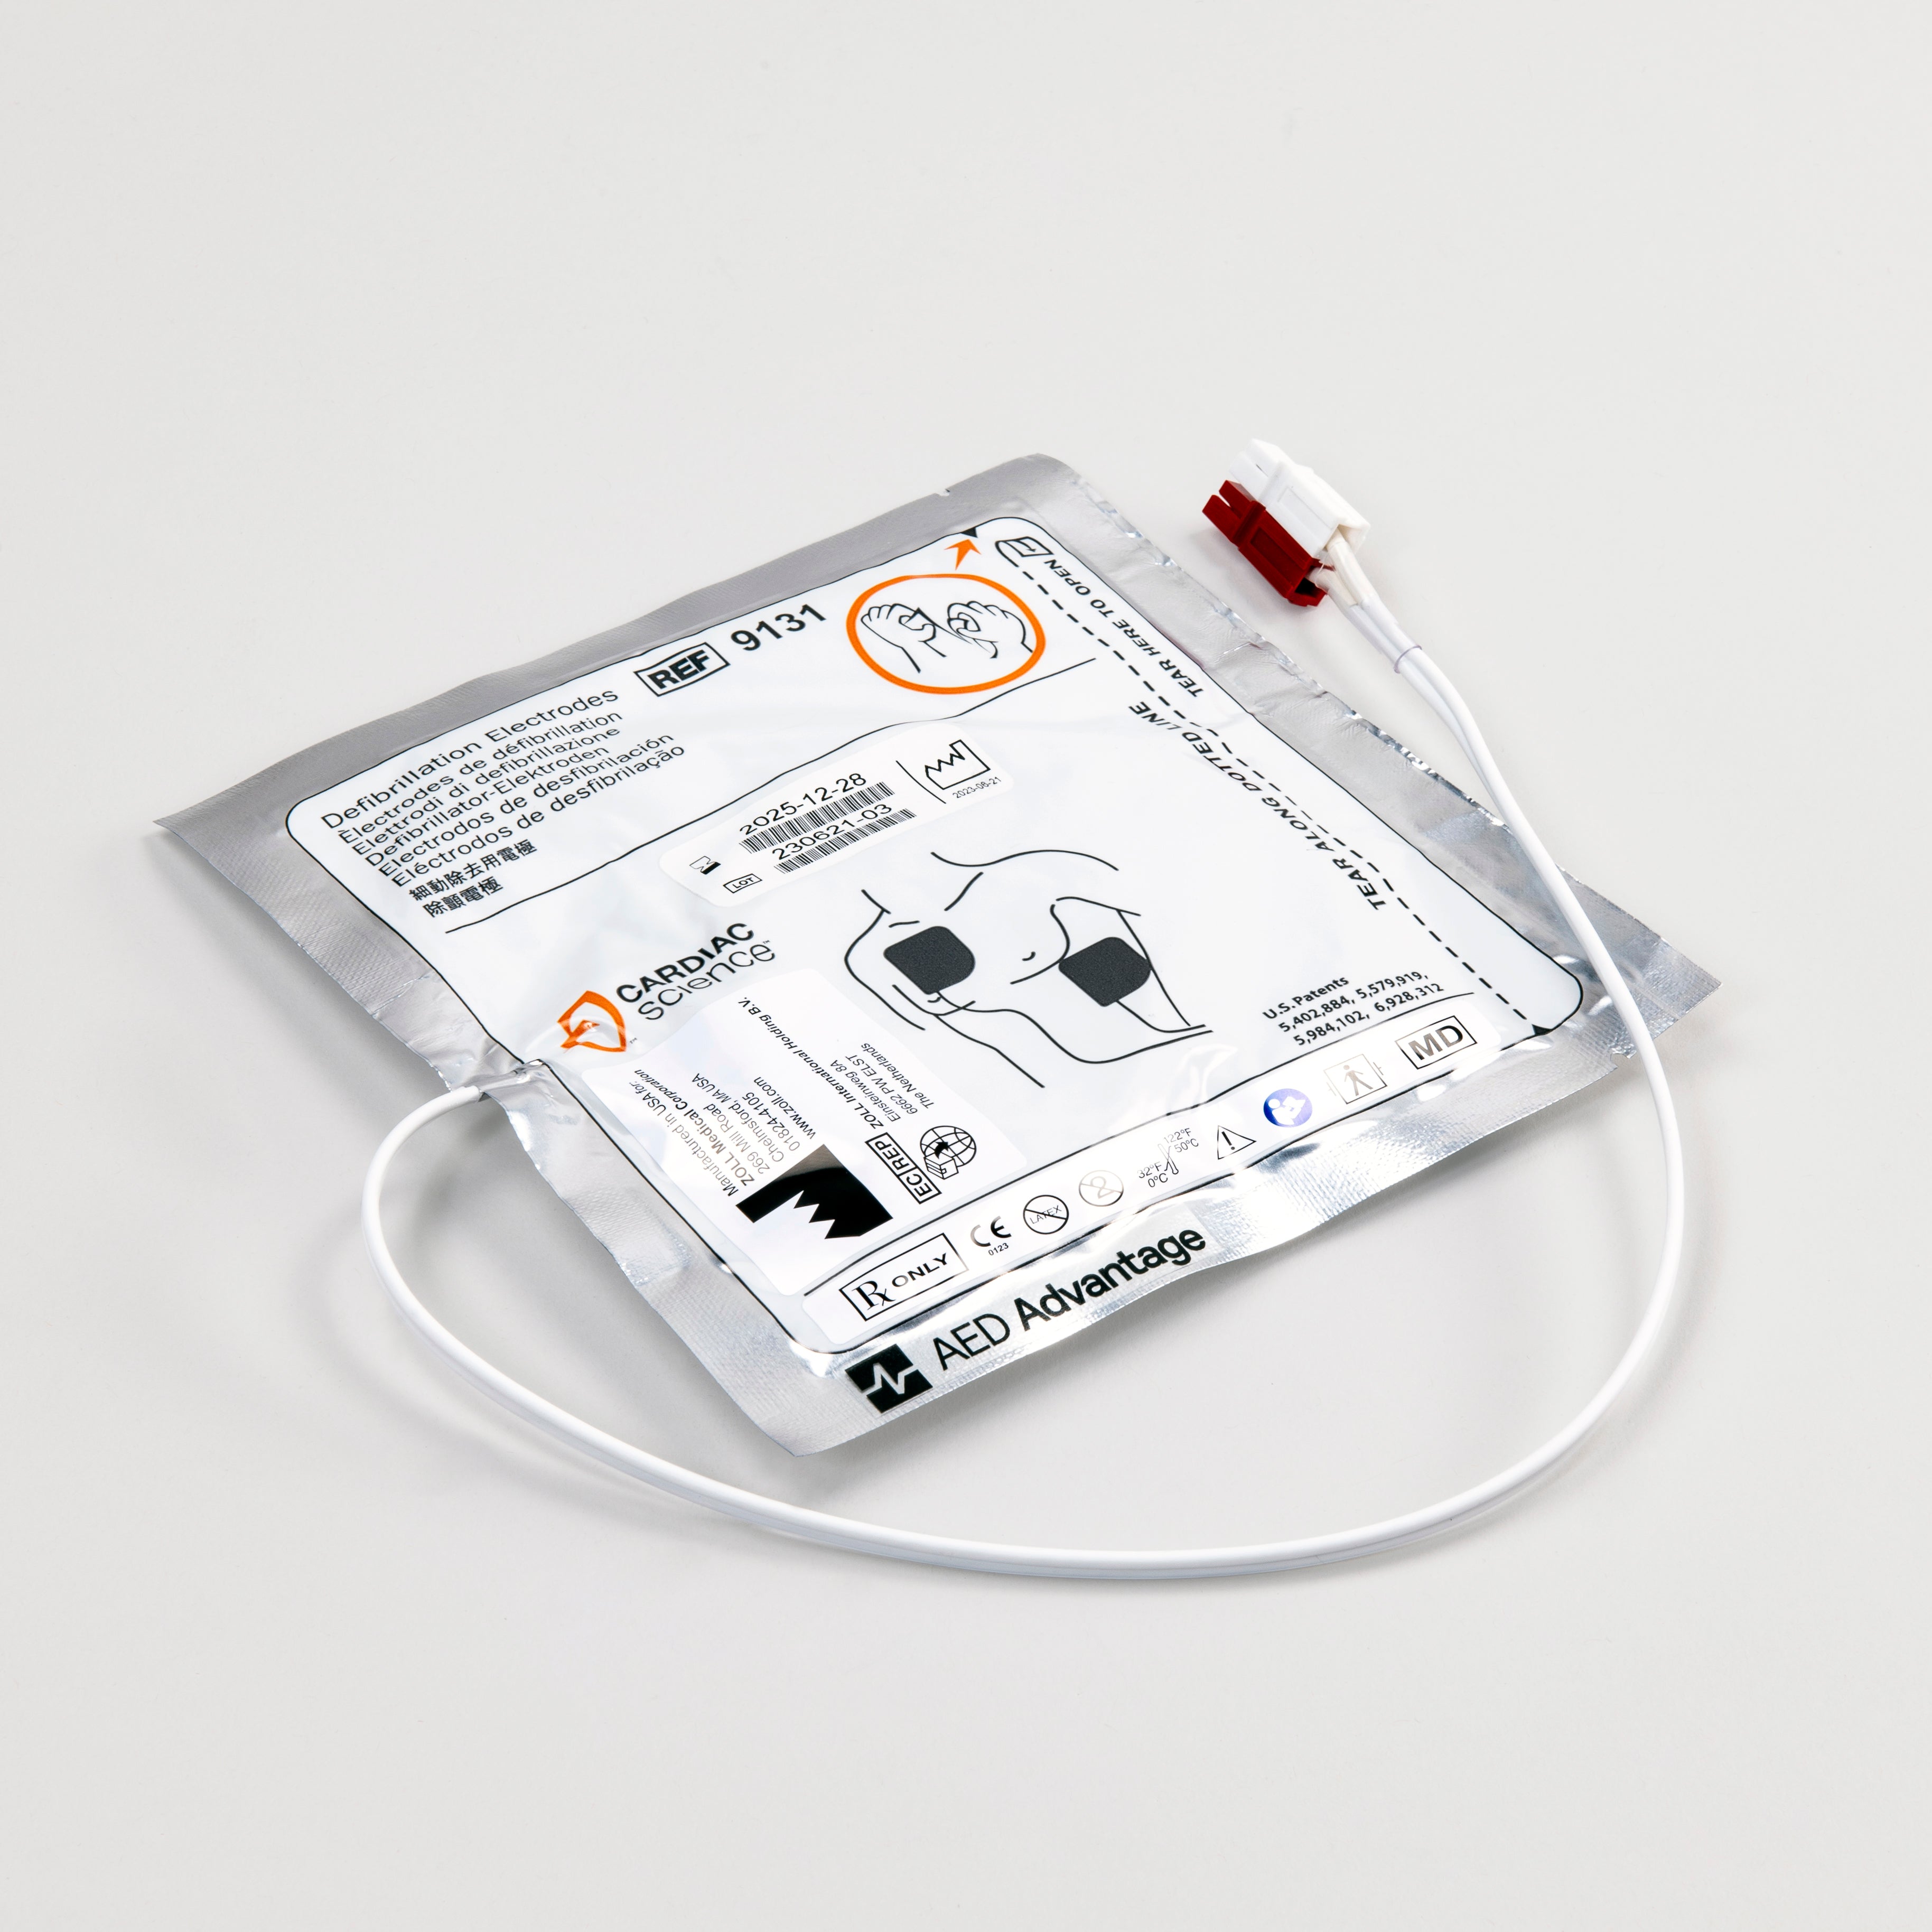 A white and silver square foil package with a white connector cord containing electrodes for the Powerheart G3 defibrillator